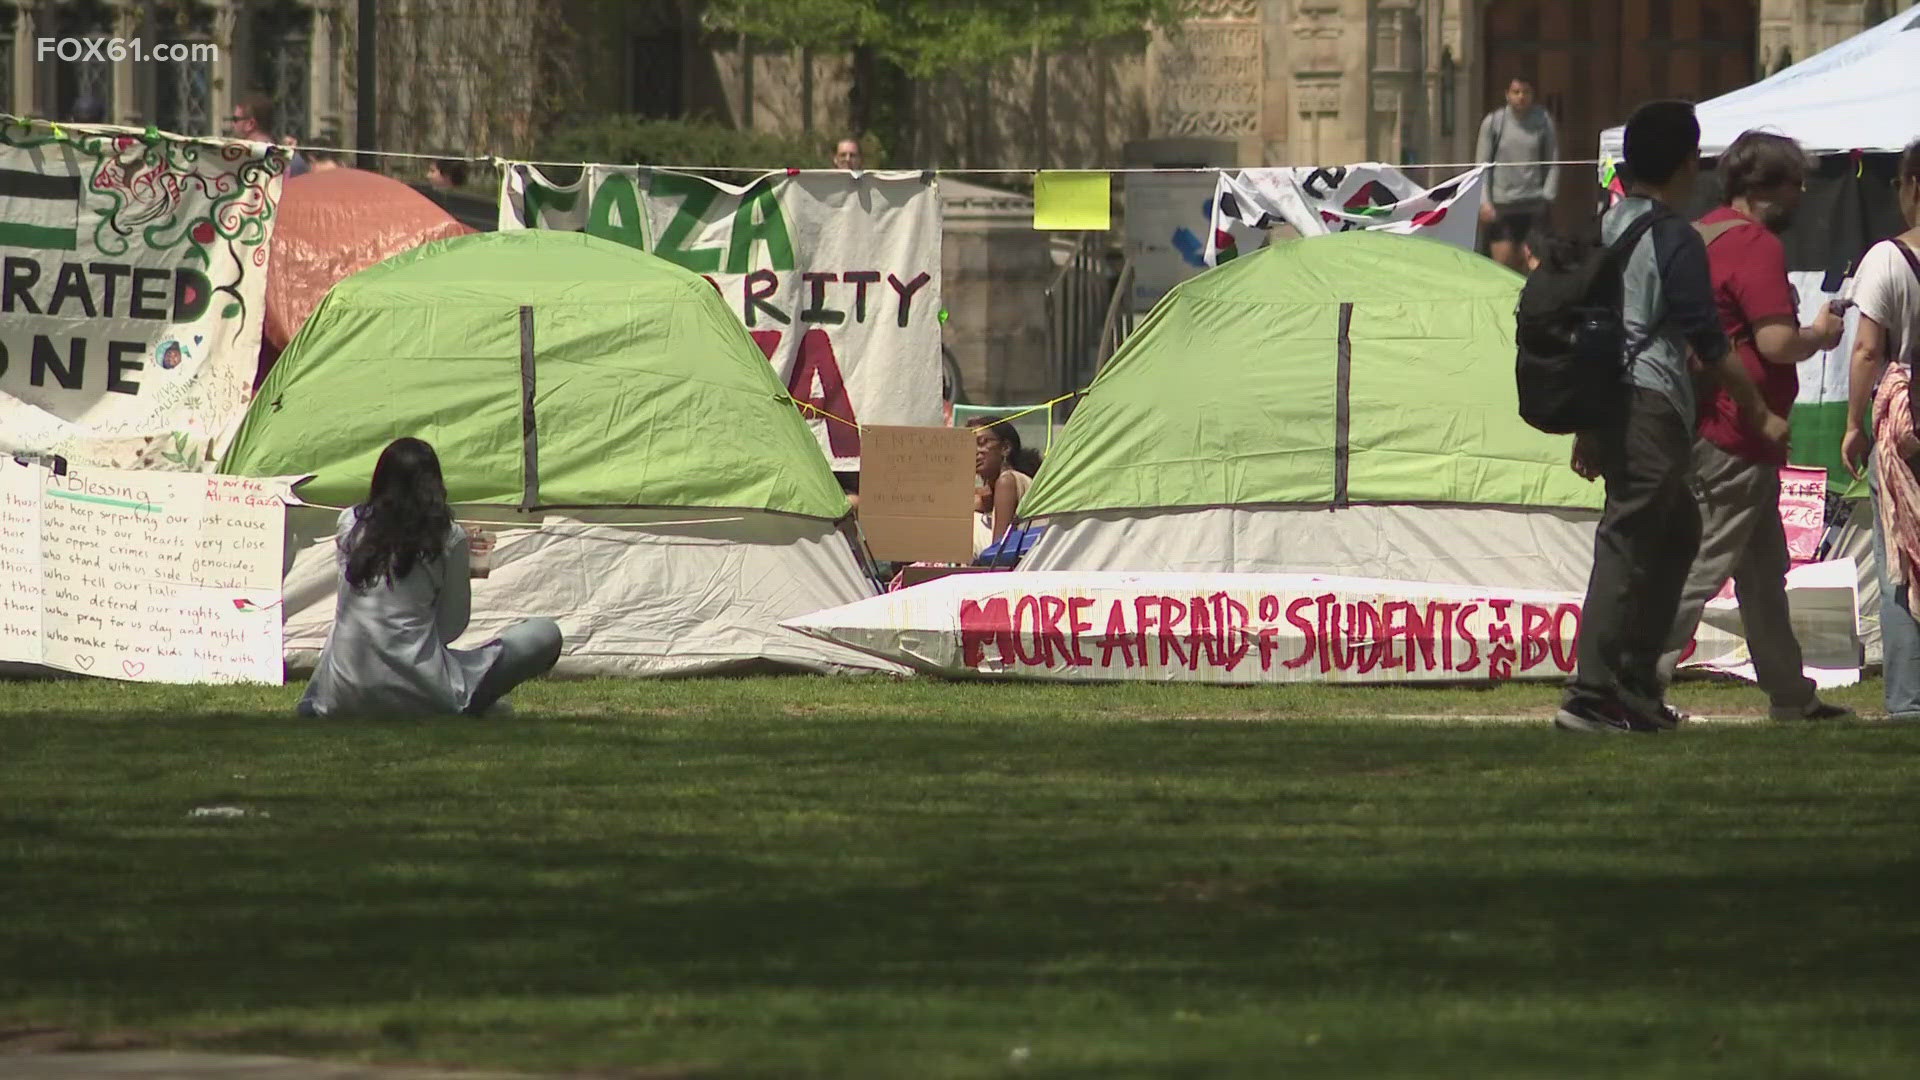 The pro-Palestinian protests on Yale's campus evolved once again over the weekend, as students put up tents and created an encampment.